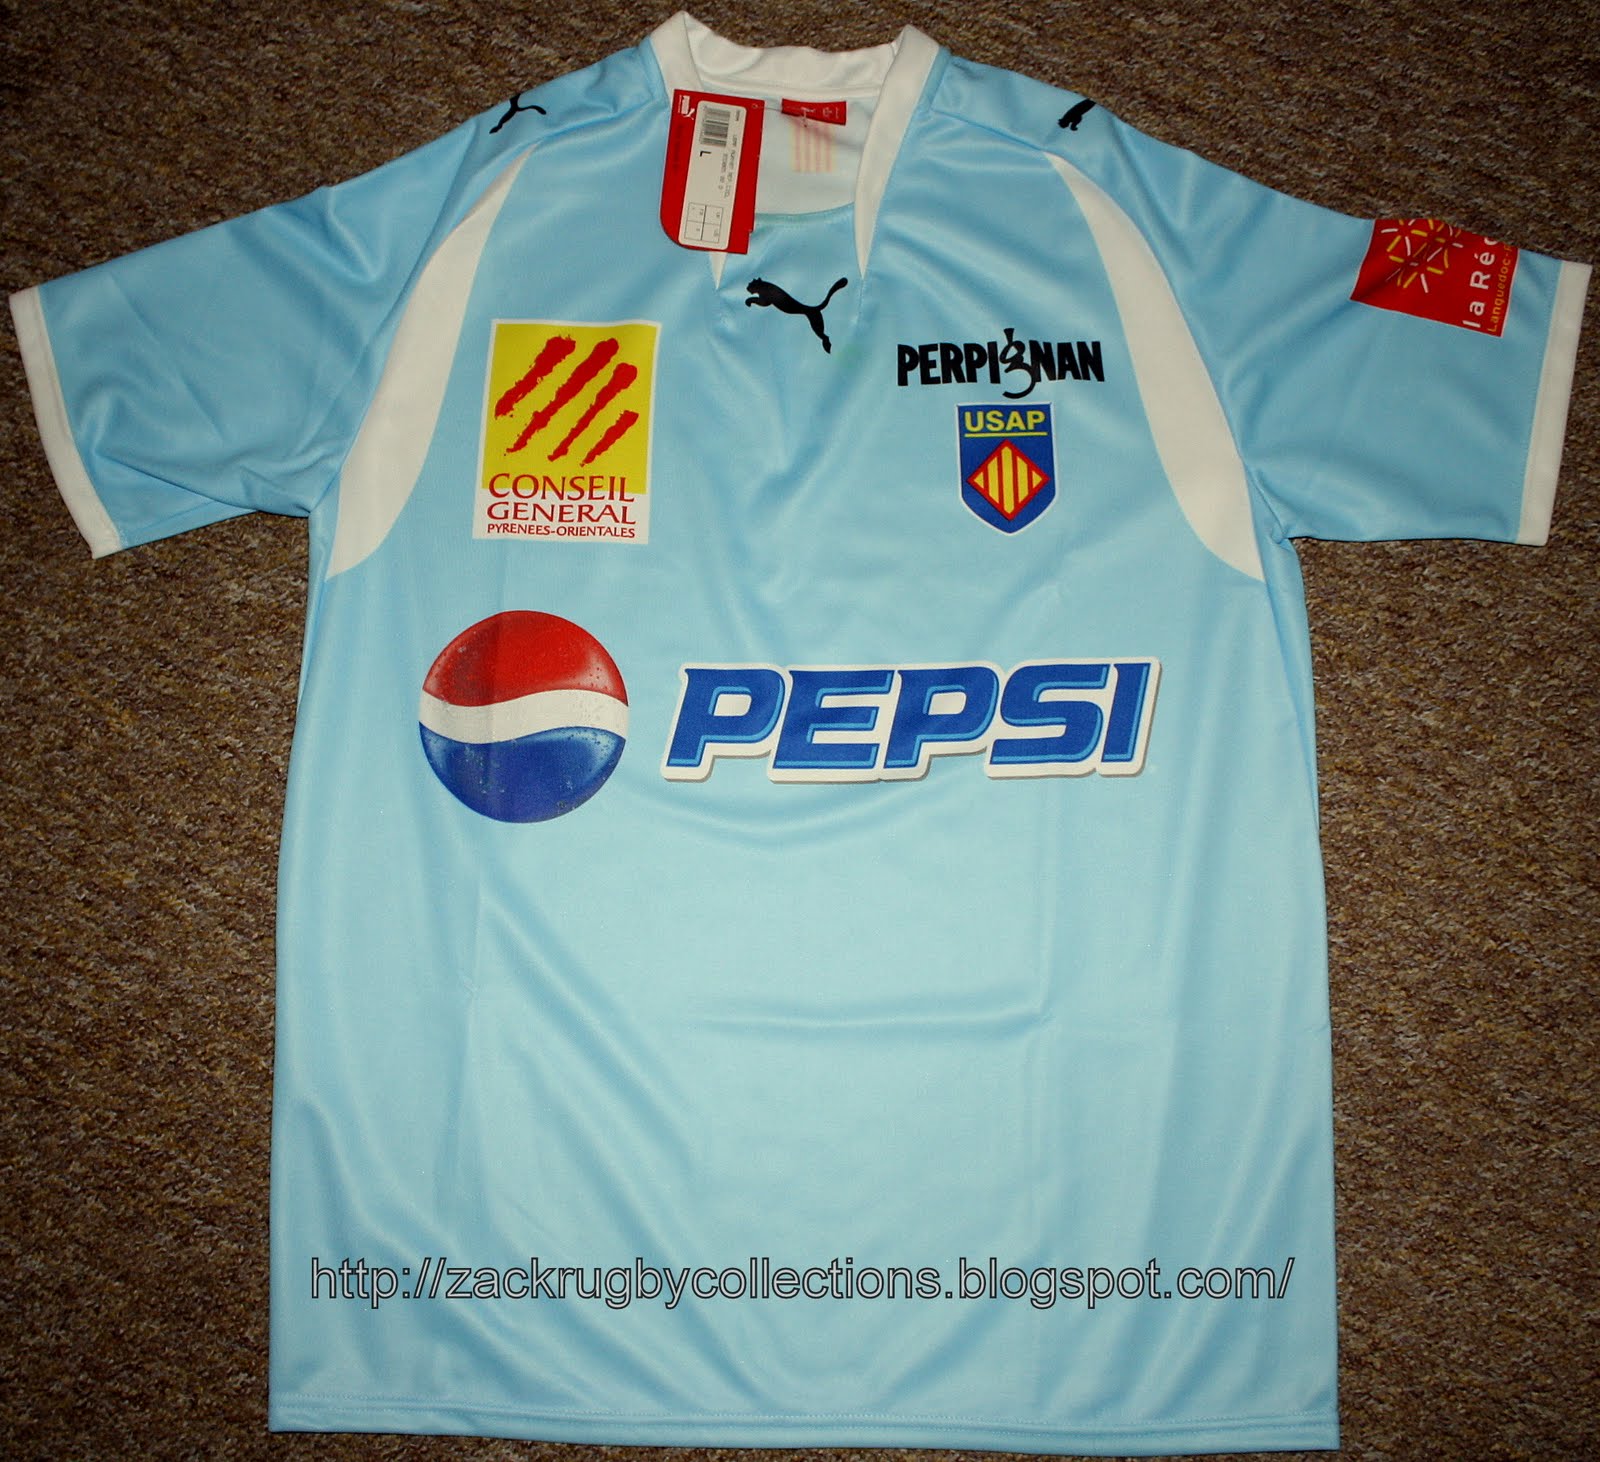 perpignan rugby jersey